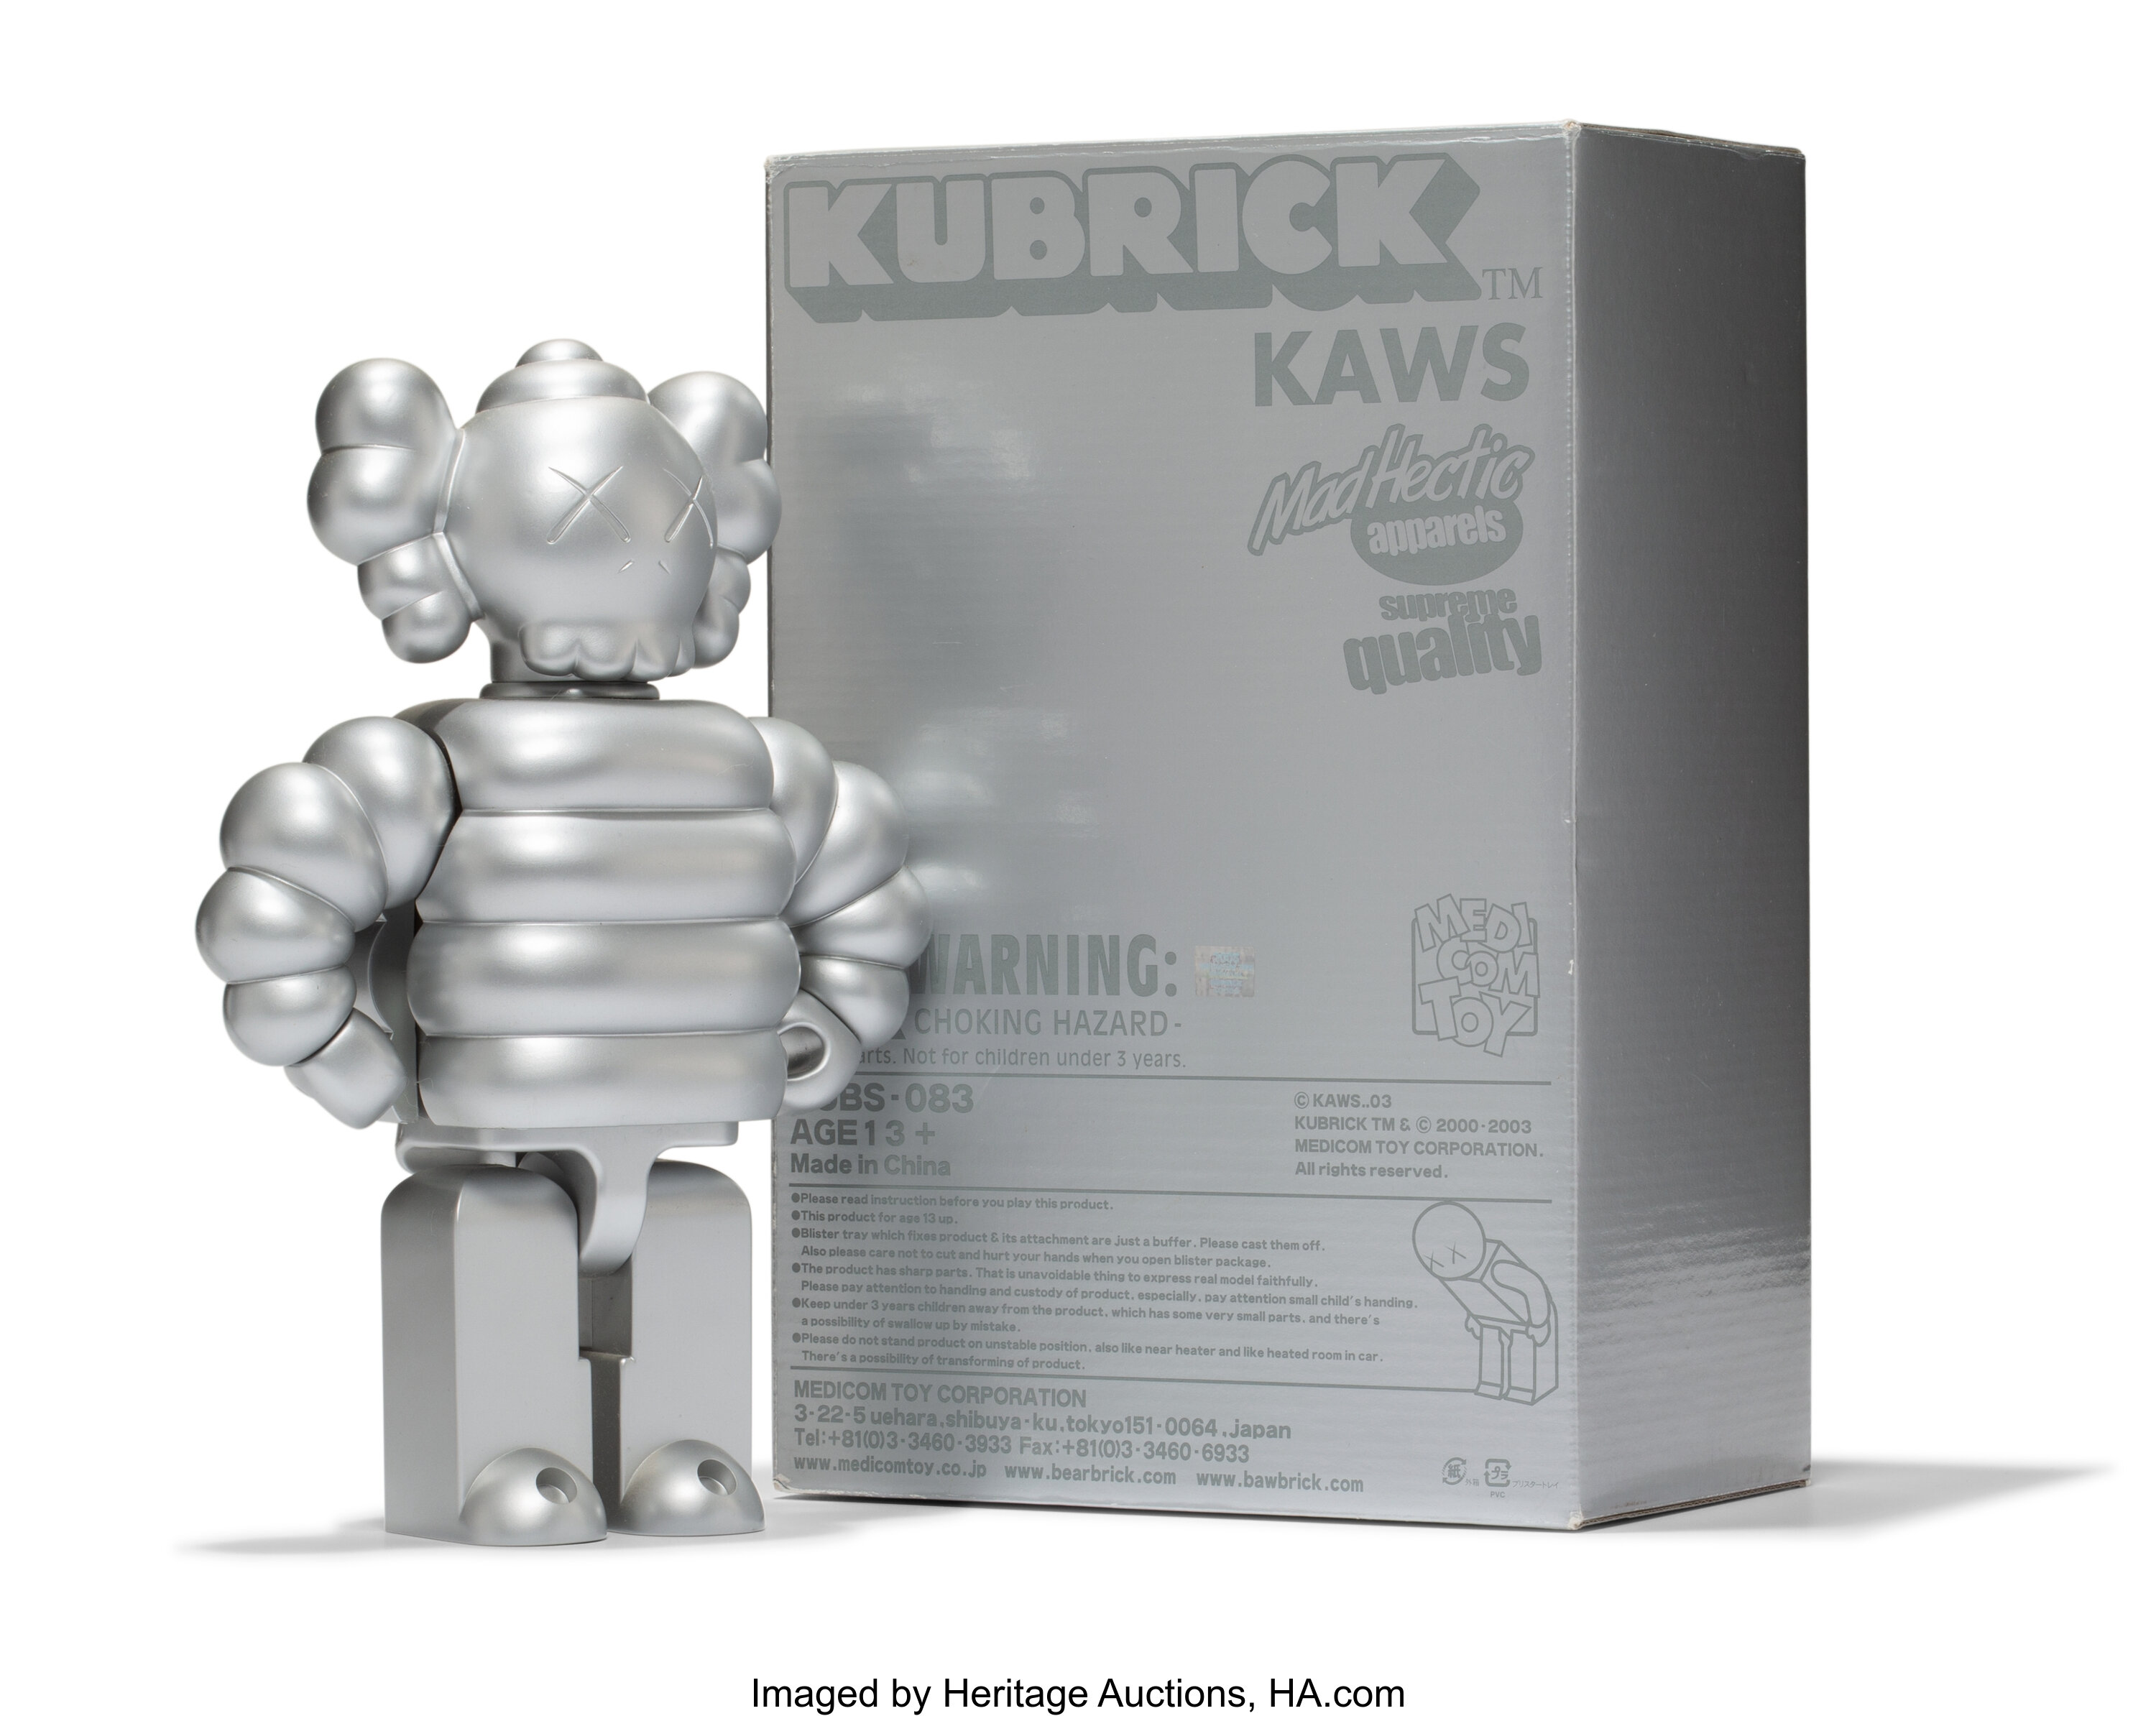 KAWS X realMad Hectic. Kubrick 400% (Silver), 2003. Painted cast